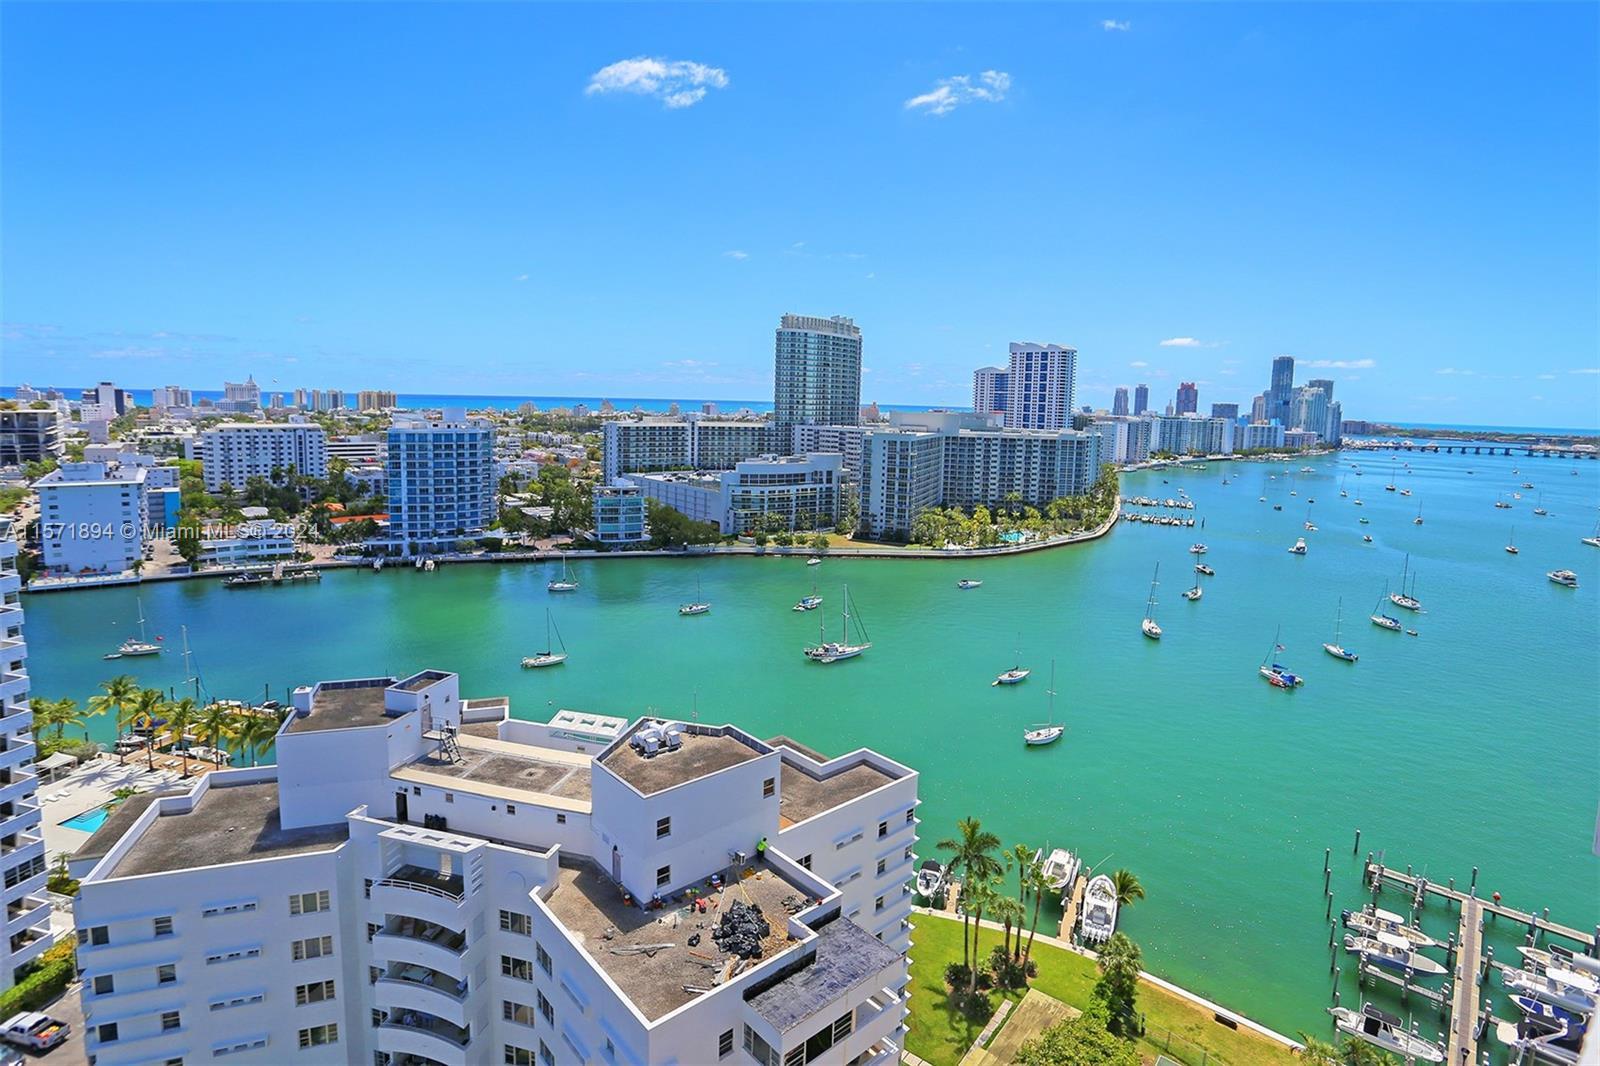 Welcome to your newly remodeled Miami Beach haven! This 3-bed, 3.5-bath condo boasts modern elegance